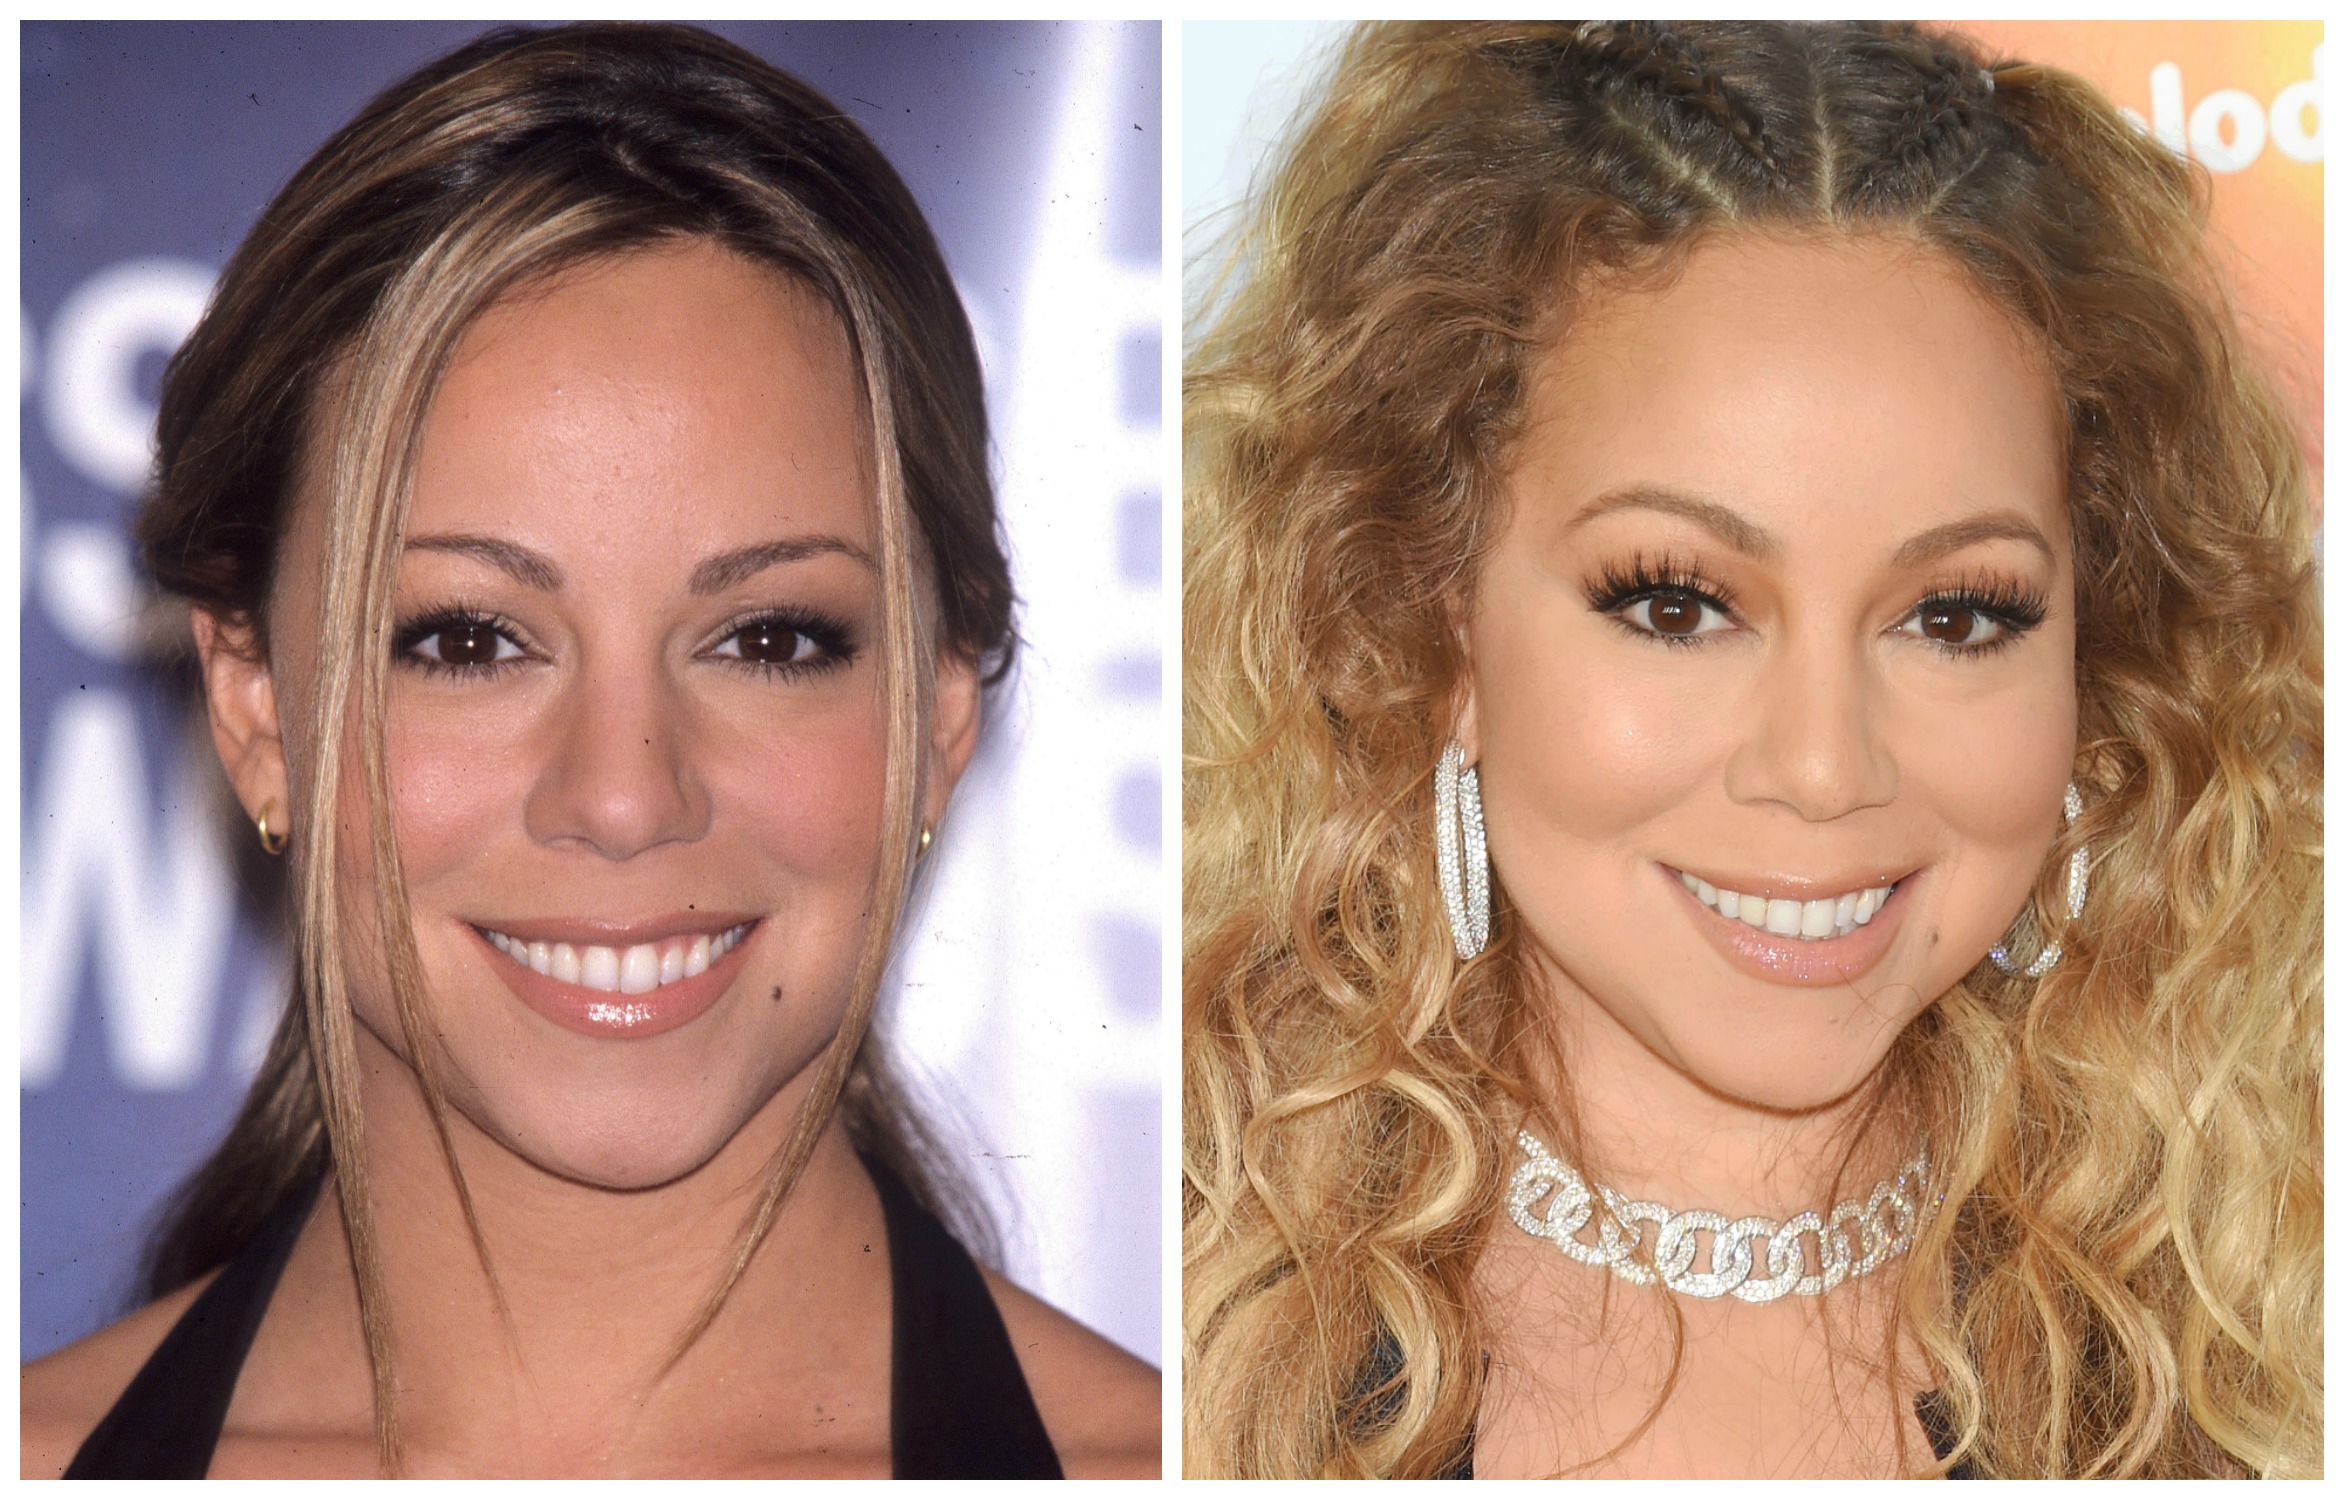 Did Mariah Carey Have Plastic Surgery? Experts Weigh In